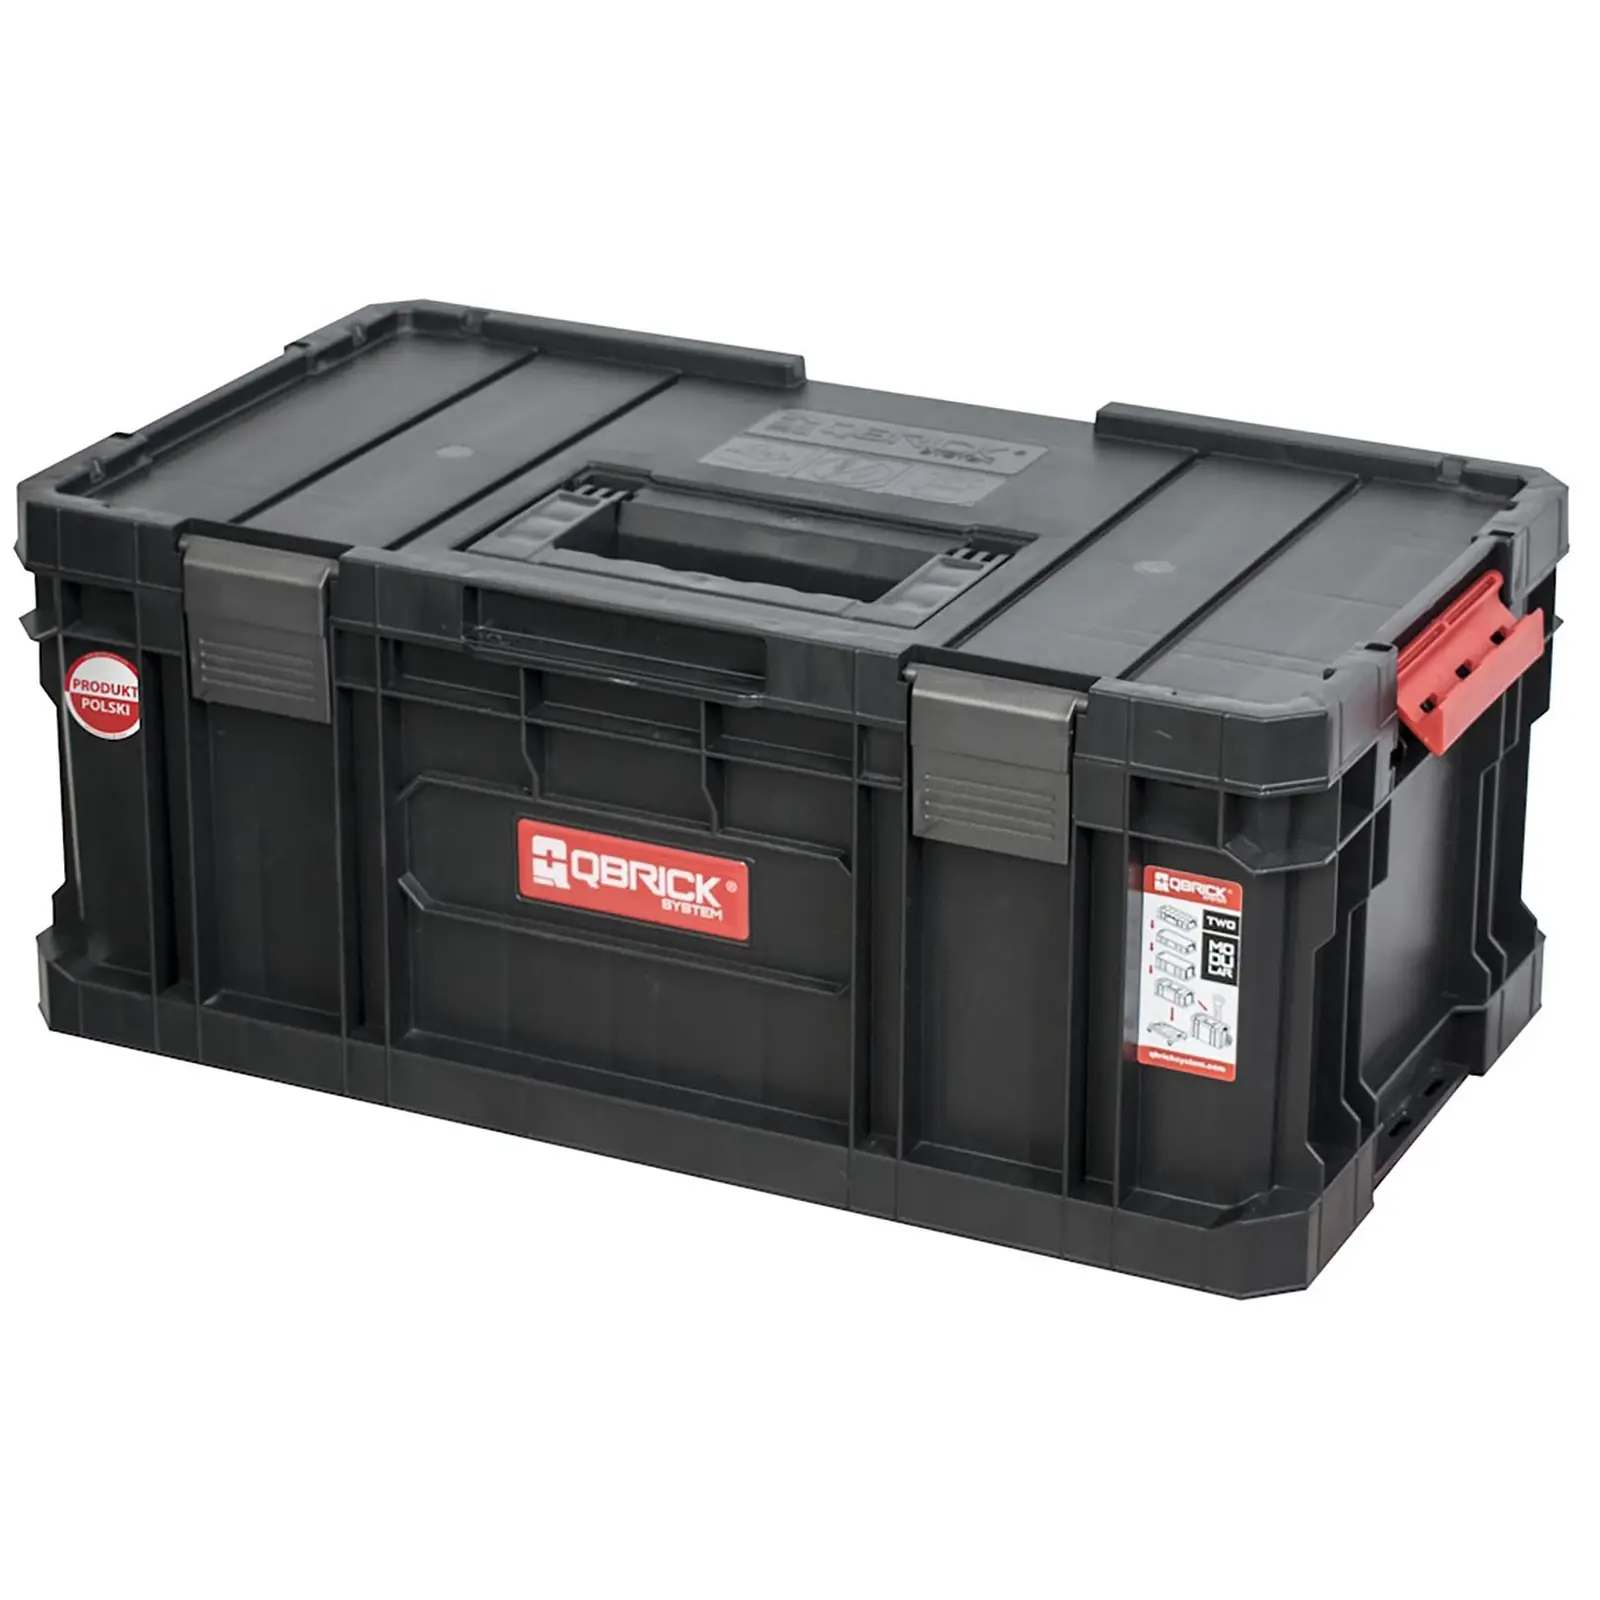 Toolbox System TWO - 2 organisers - divider